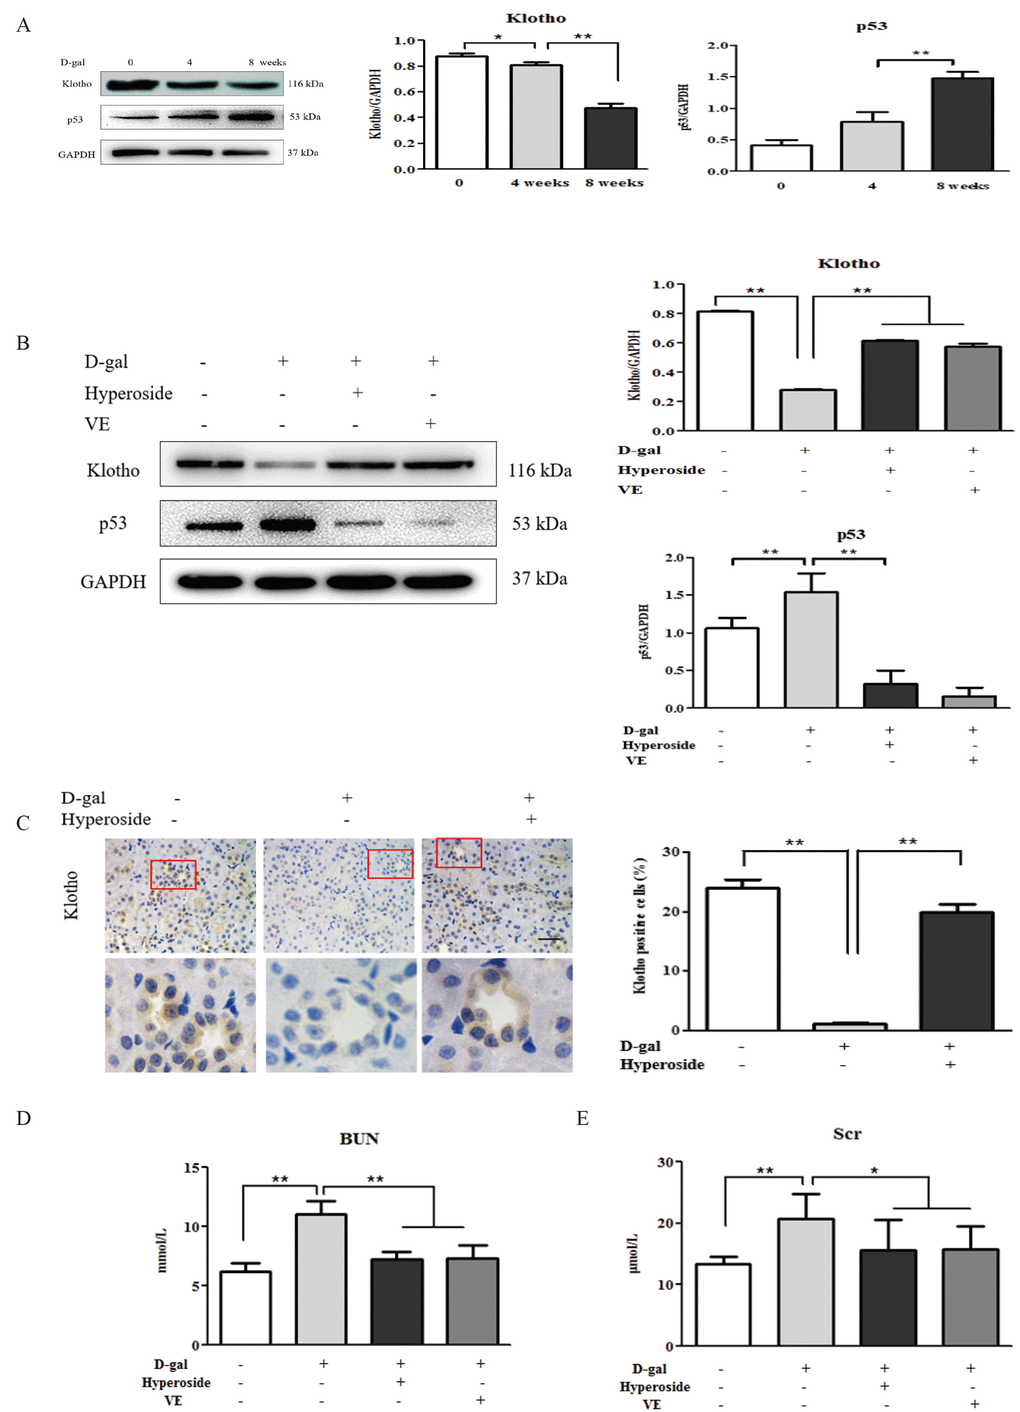 The effects of hyperoside and vitamin E on renal aging and injury induced by D-galactose in vivo. (A) A WB analysis of klotho and p53 in the kidneys of the rats in the control, the 4 week-D-gal and the 8 week-D-gal groups. (B) A WB analysis of klotho and p53 in the kidneys of the rats in the control, the 8 week-D-gal, the D-gal + Hyperoside and the D-gal + VE groups. (C) Immunohistochemical staining of klotho and the percentage of positively stained areas for klotho in the control, the 8 week-D-gal and the D-gal + Hyperoside groups. Scale bar = 20 μm. (D, E) The serum levels of BUN and Scr in the control, the 8 week-D-gal, the D-gal + Hyperoside and the D-gal + VE groups. The data are expressed as the mean ± SD, (n=3), *P **P 